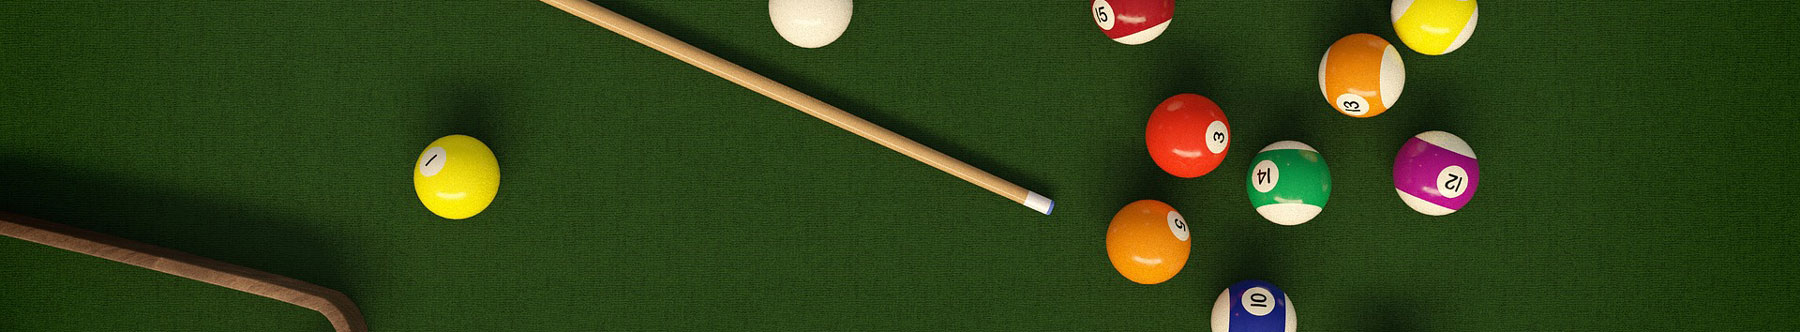 Billiards table with cue stick, ball rack, and a set of billiard balls.